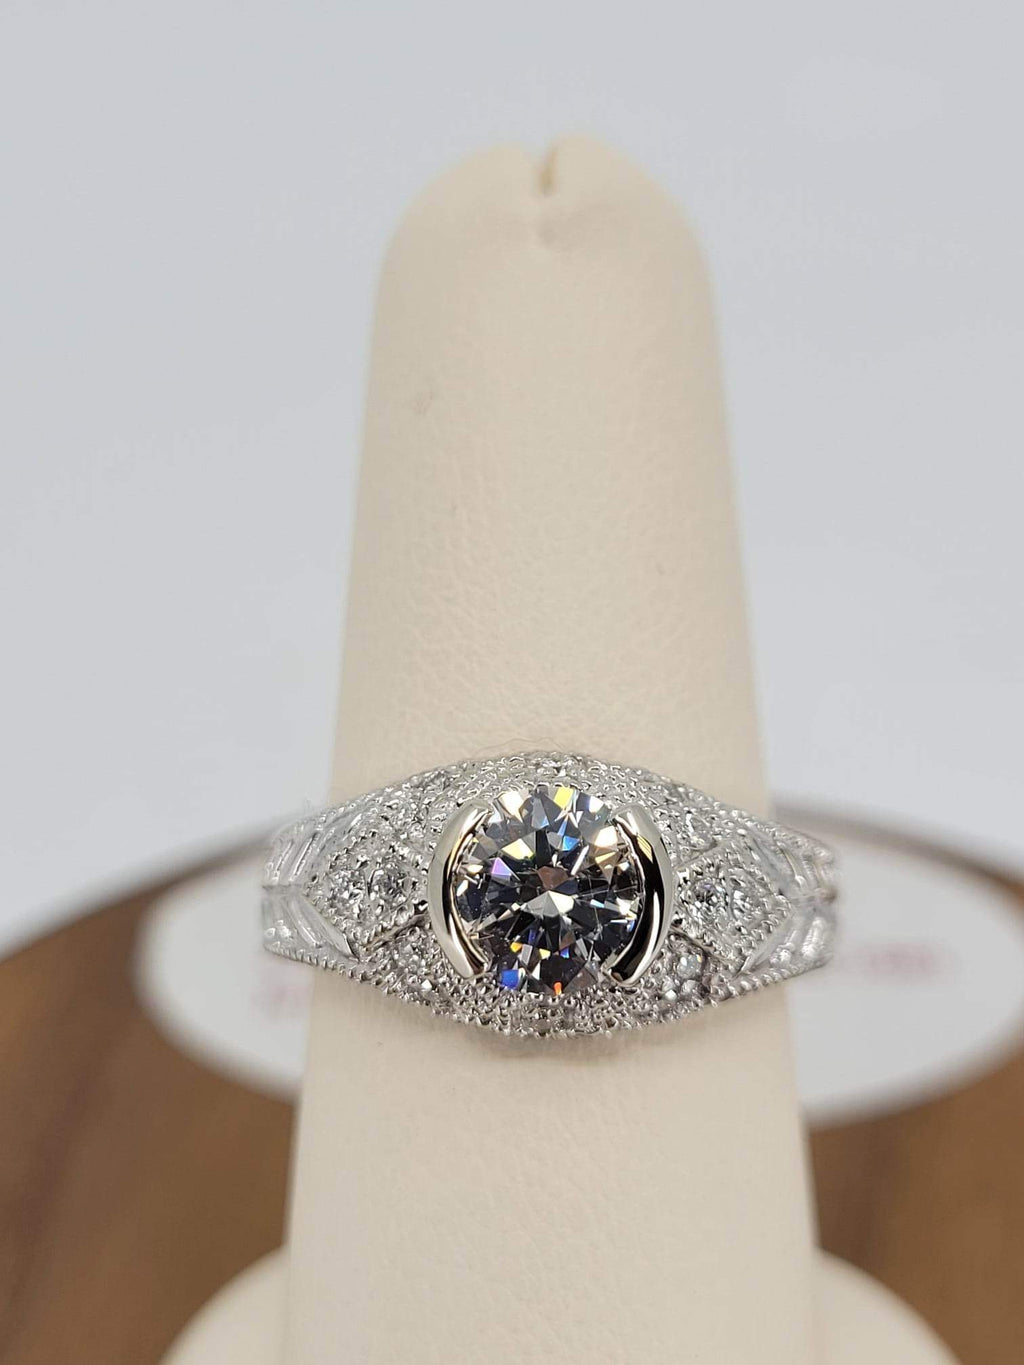 Vintage Style Engagement Ring